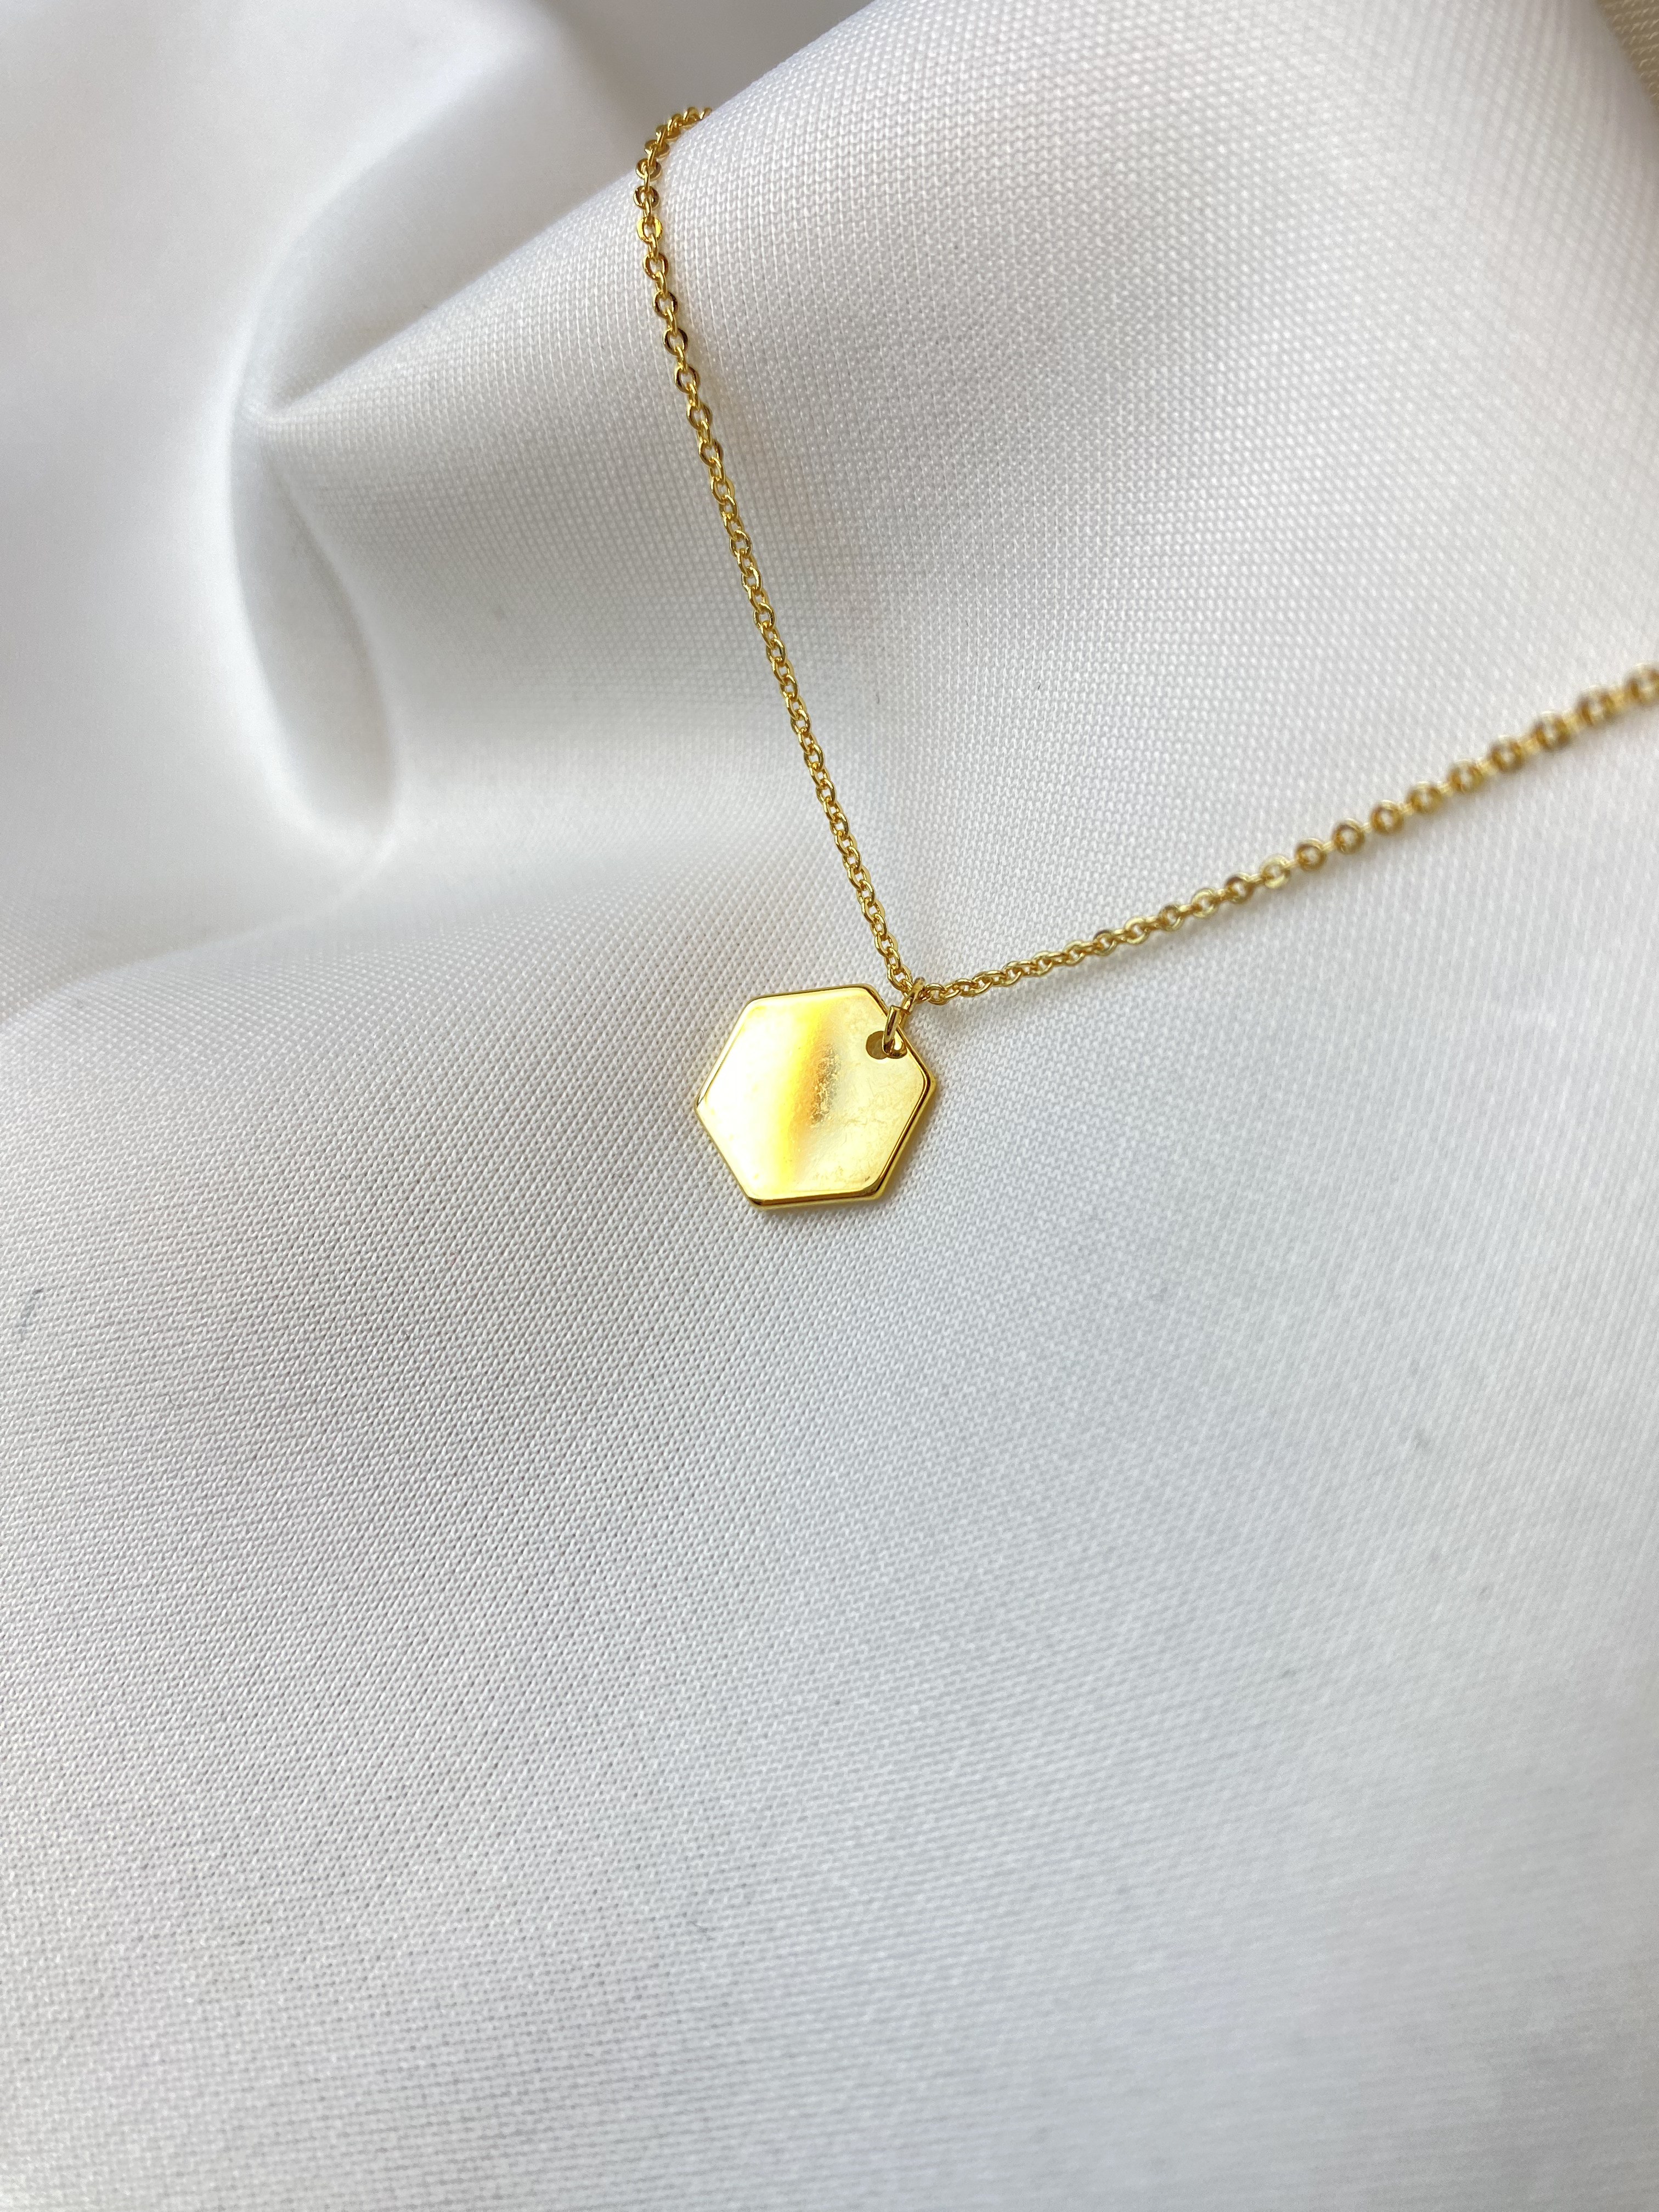 Hexagon shaped gold pendant, Personalized Necklace